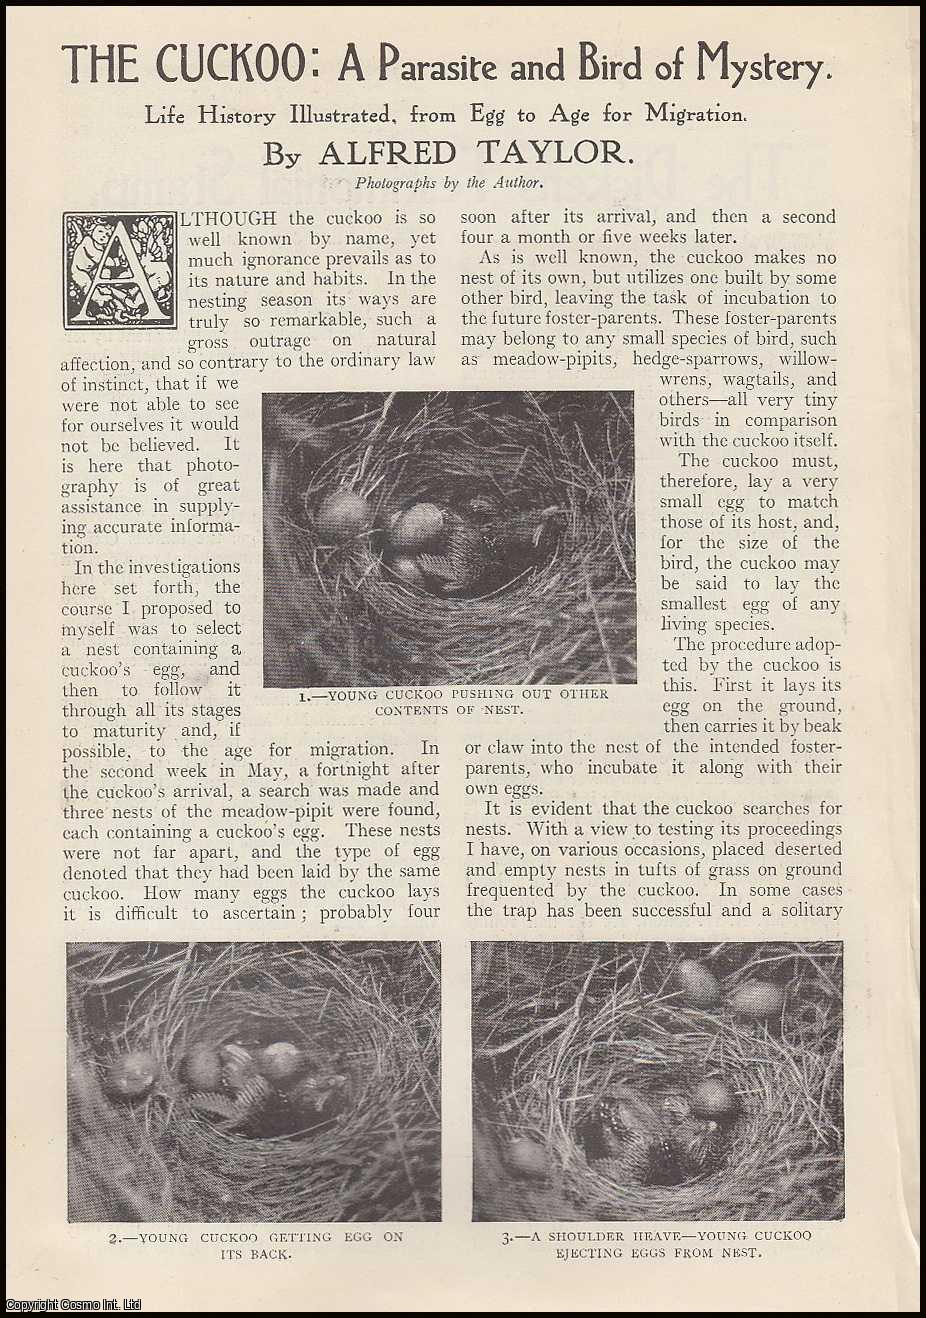 Alfred Taylor - The Cuckoo : a Parasite & Bird of Mystery. Life History Illustrated, from Egg to Age for Migration. An uncommon original article from The Strand Magazine, 1911.